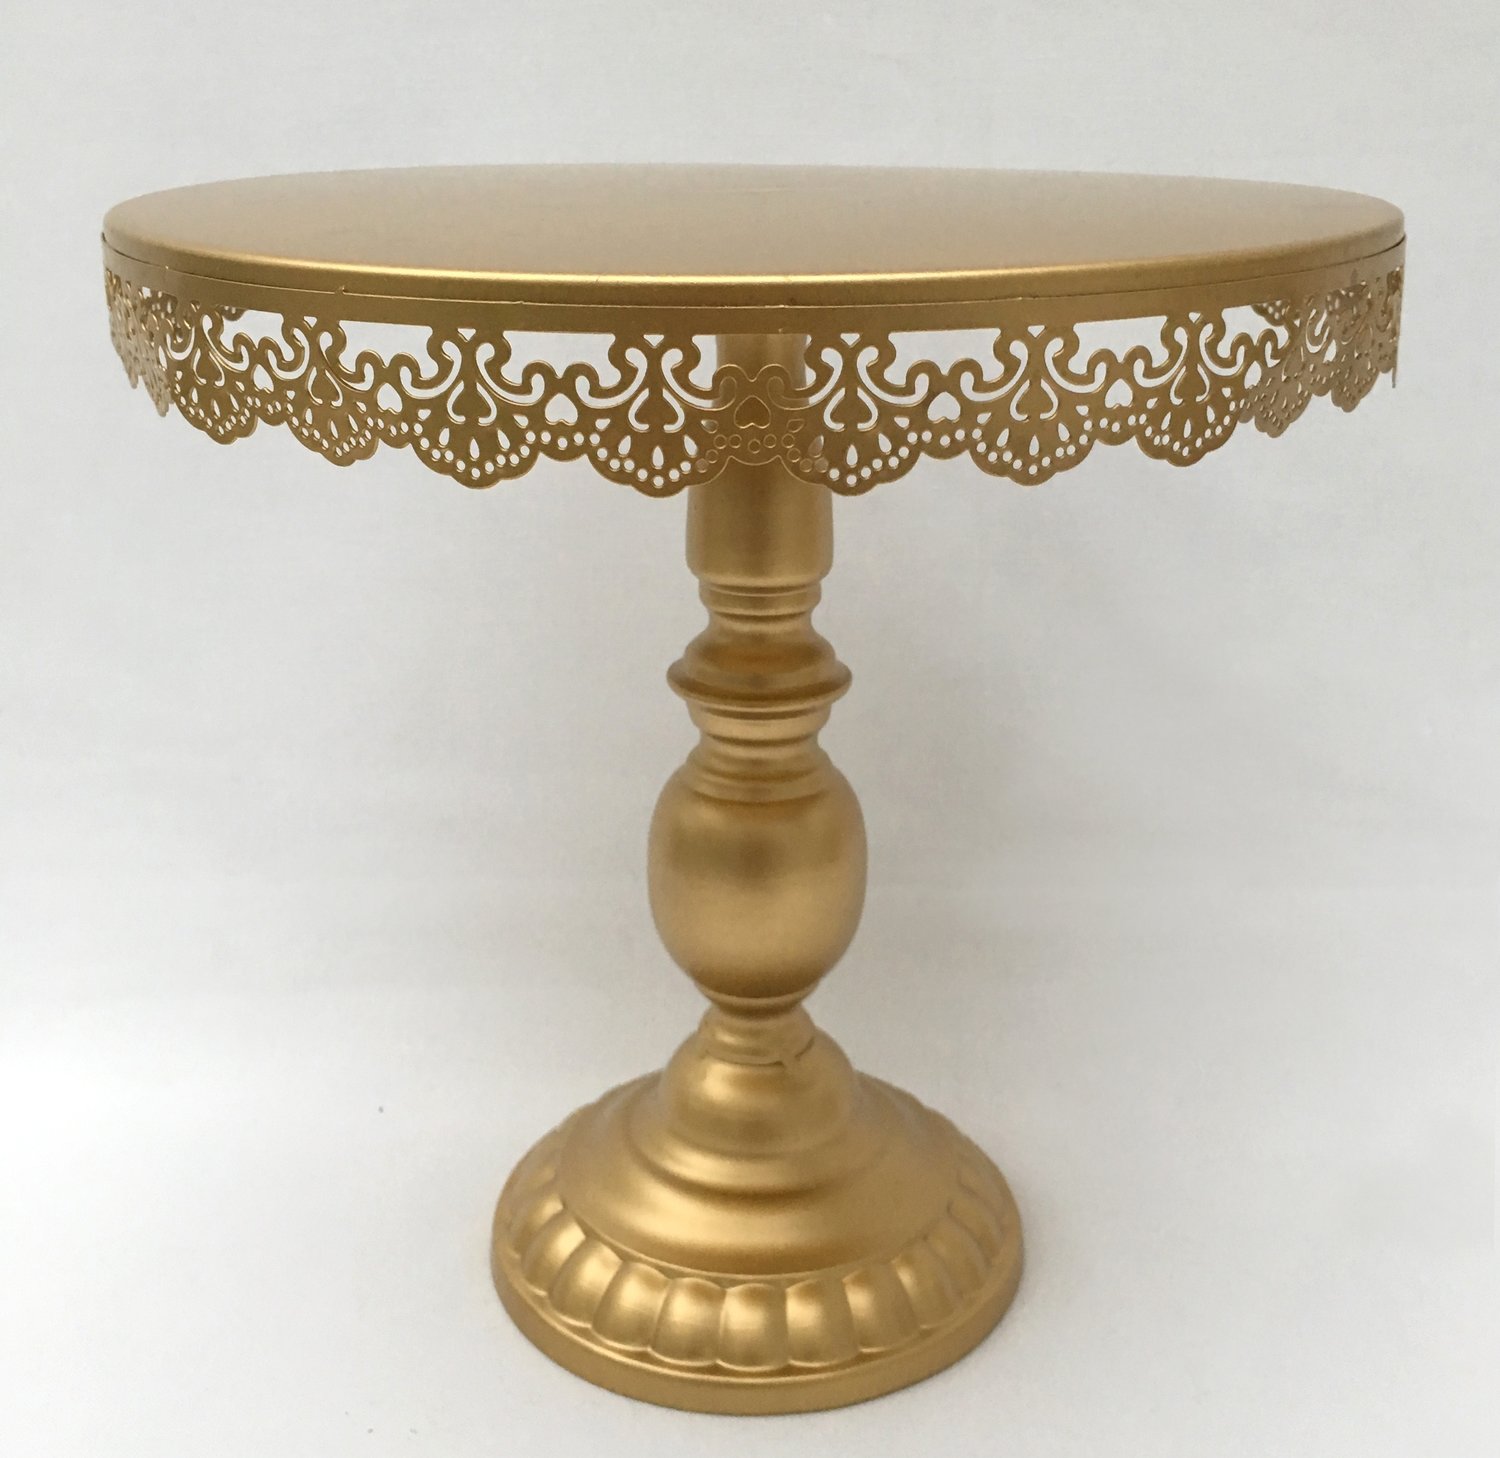 Medium Gold - Vintage with Filigree Design -  Pedestal -1 Tier Cake Stand - Code GD0034L - LARGE SIZE - 12" ROUND X 11.5" TALL